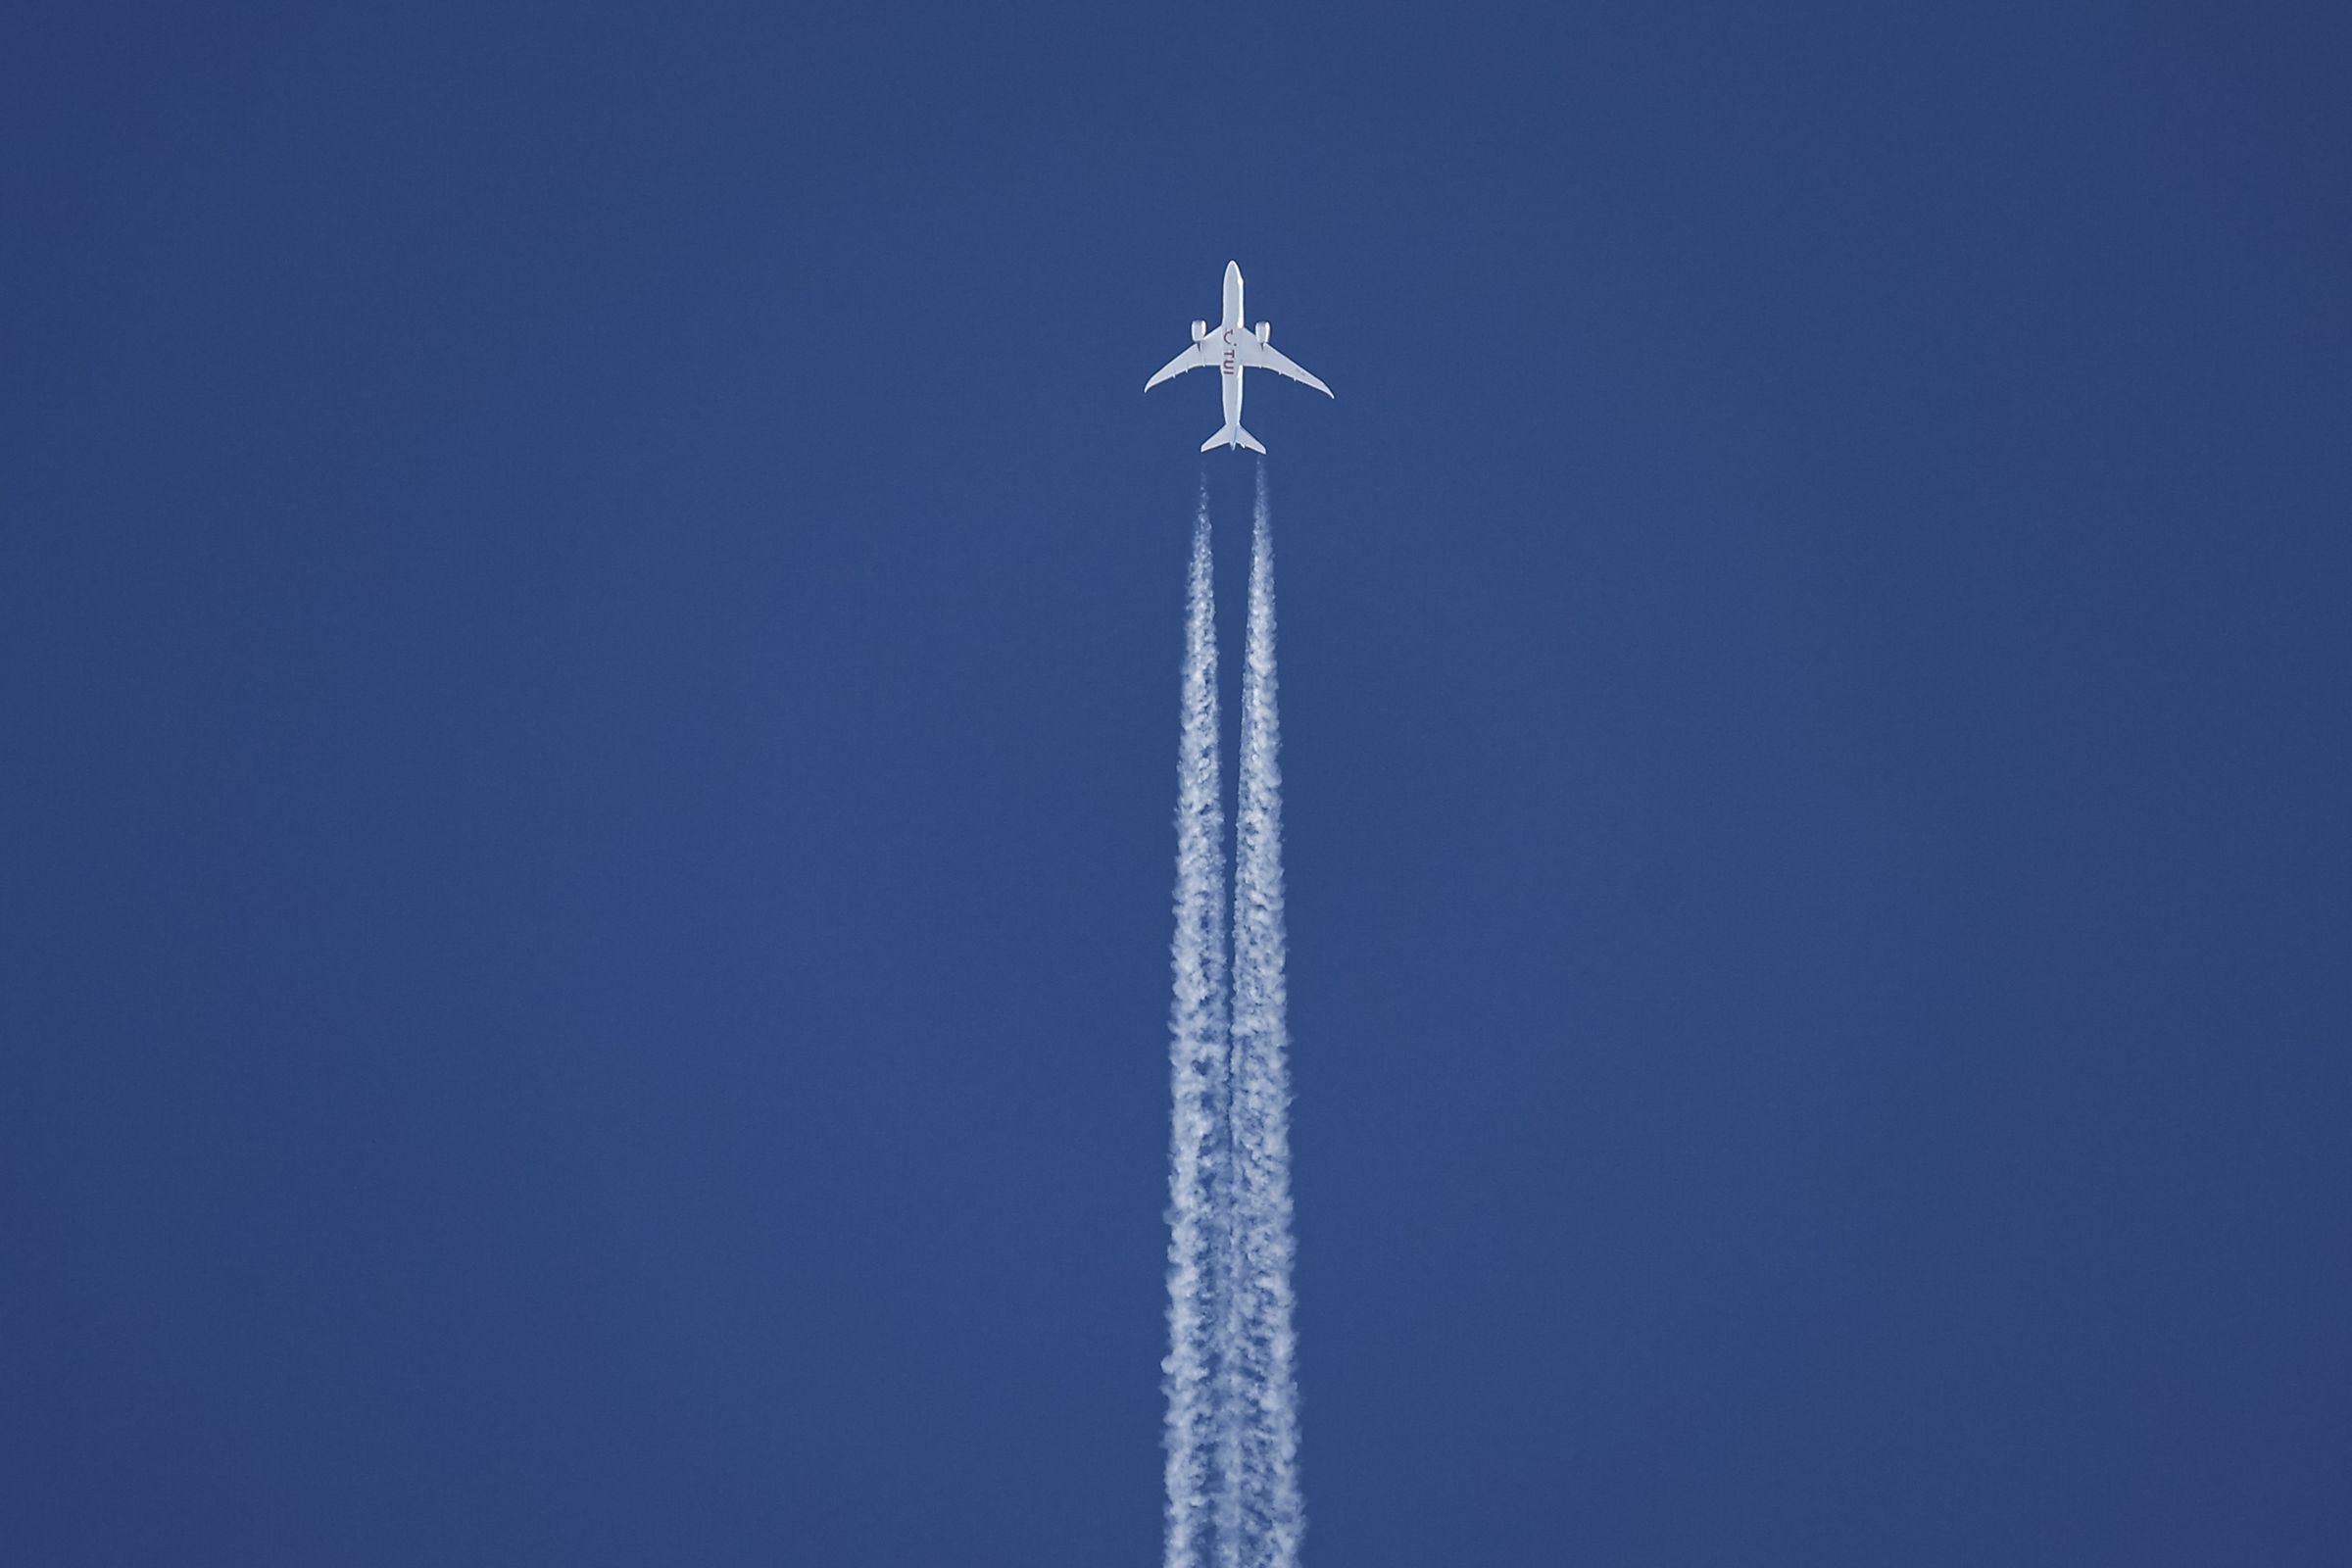 A plane flying against a blue sky with contrails behind it.